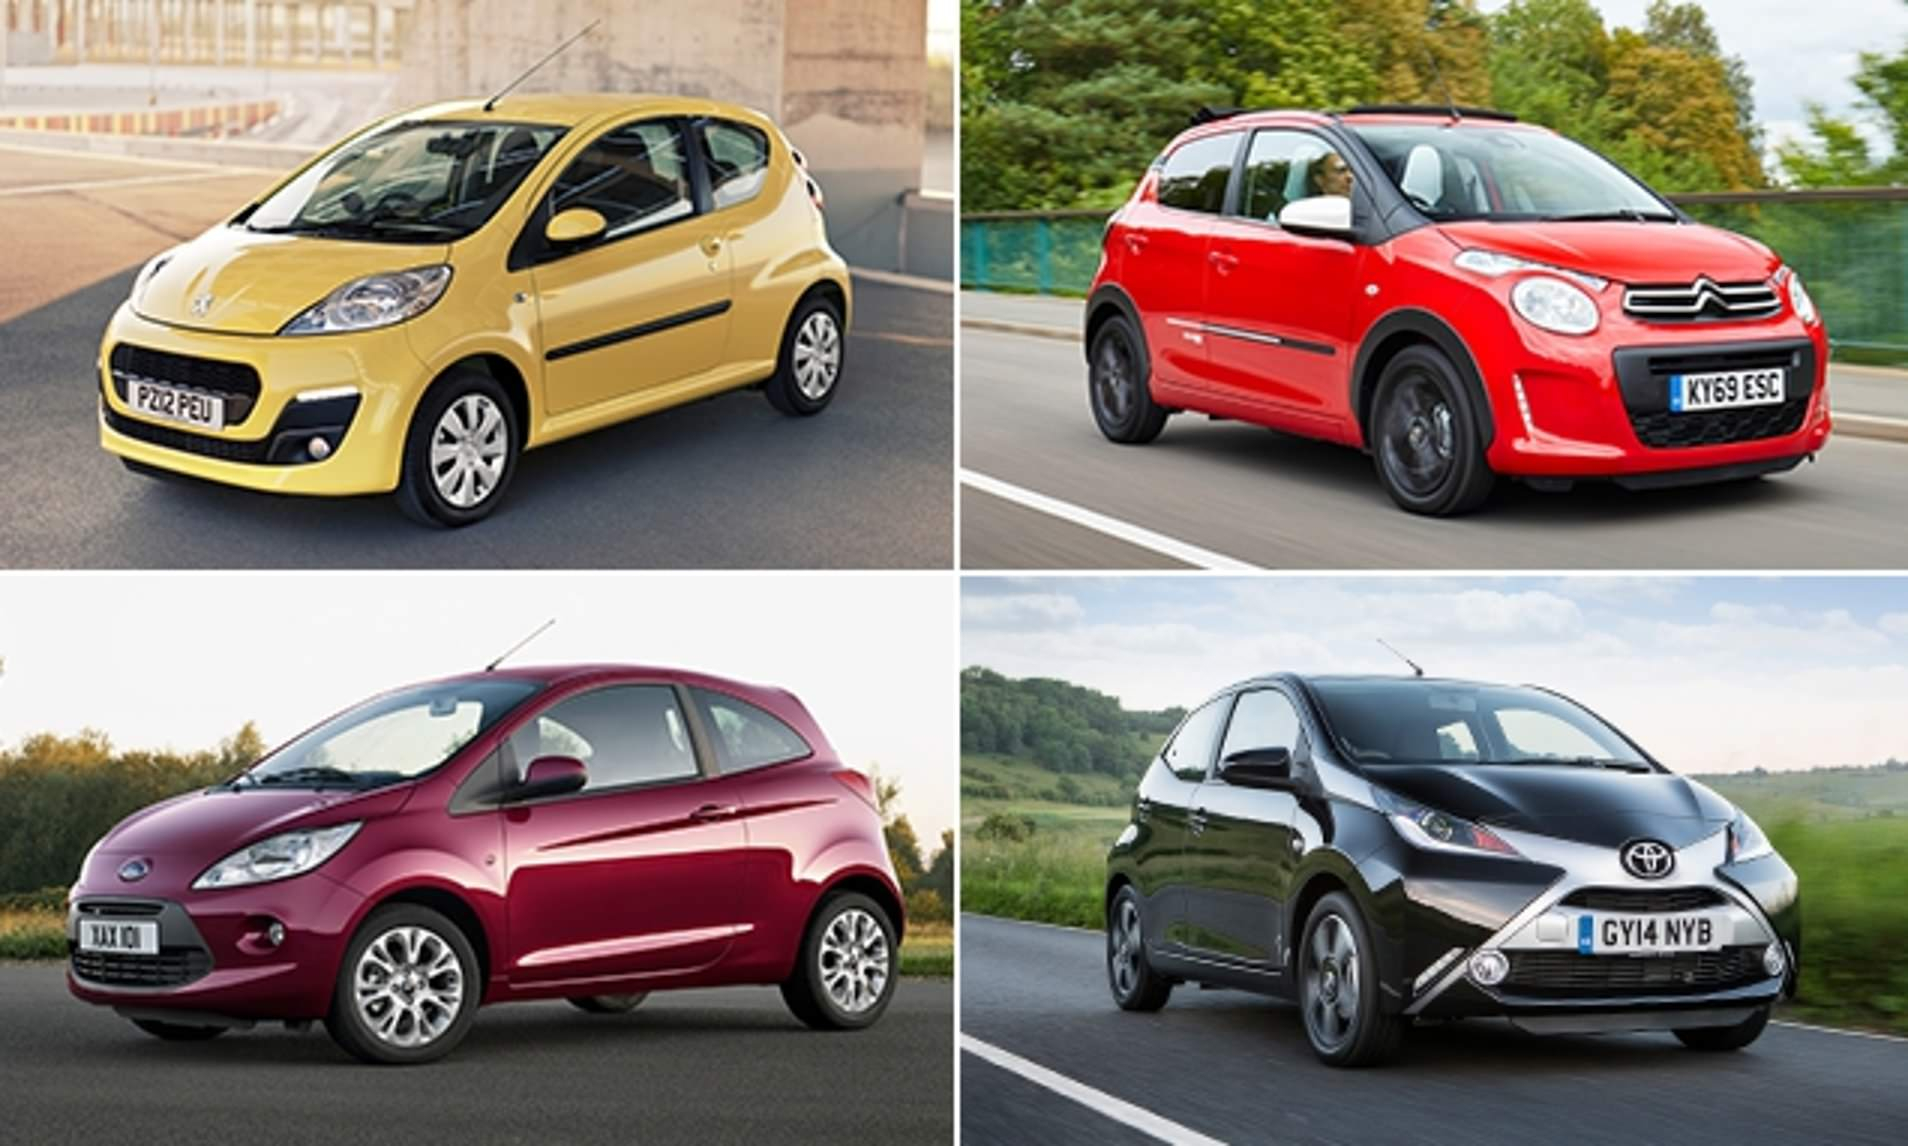 Nine Cheapest Cars For Young Drivers To Insure In 2020 regarding measurements 1908 X 1146